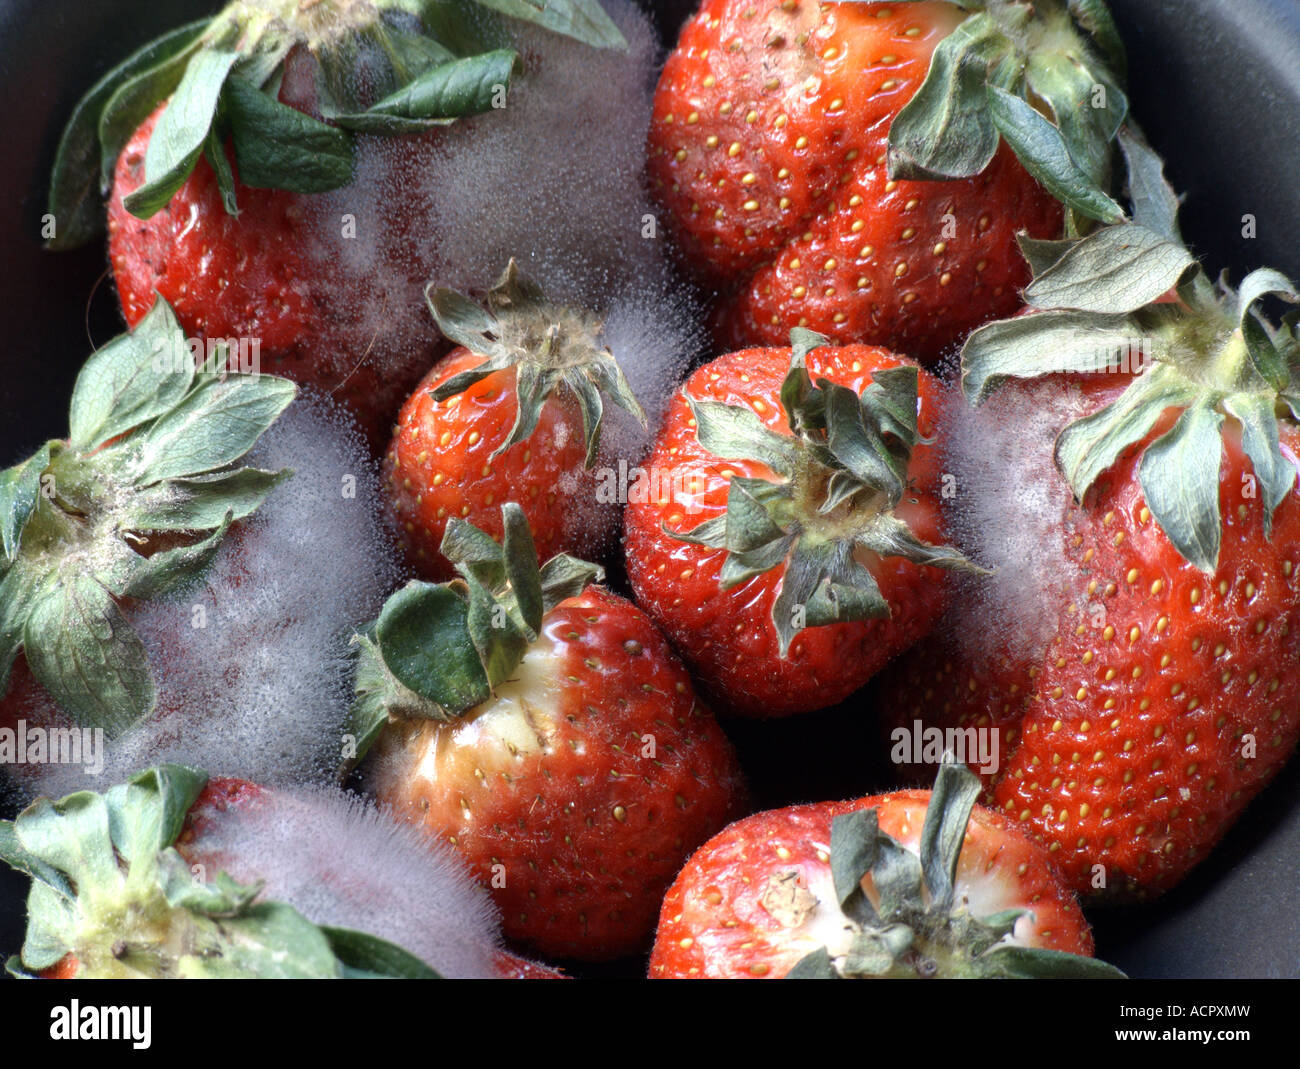 1,200+ Strawberry With Mold Stock Photos, Pictures & Royalty-Free